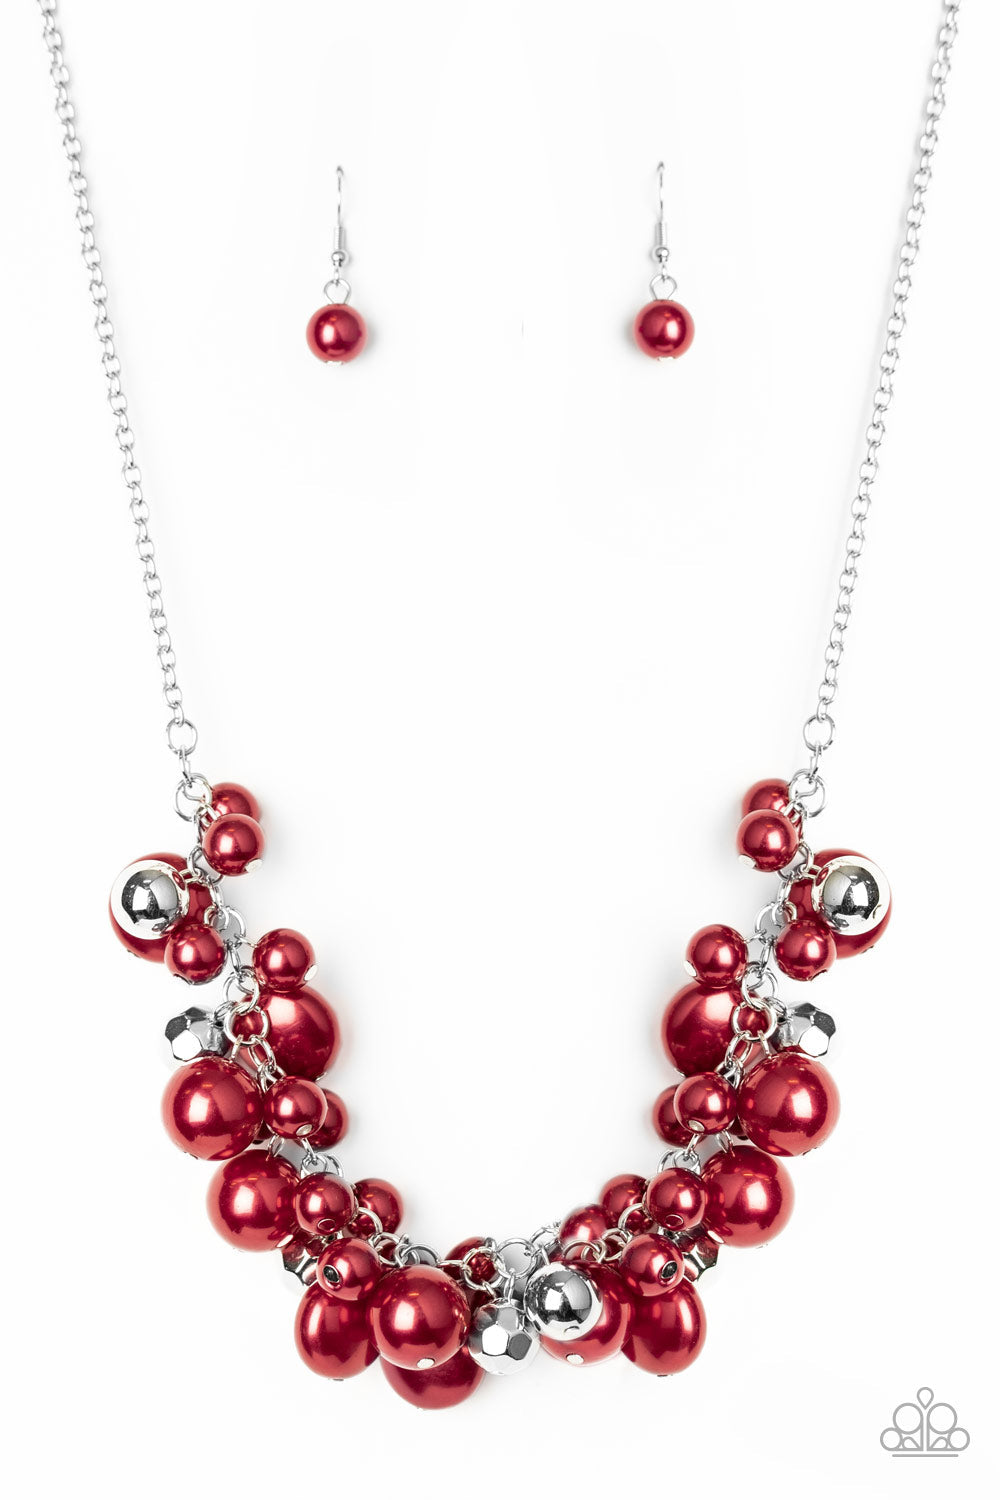 Battle of the Bombshells - Red and Silver Necklace - Paparazzi Accessories - Sprinkled with faceted and shiny silver beaded accents, a bubbly collection of round, oval, and flat red pearls cluster below the collar for a statement-making finish. Features an adjustable clasp closure. Sold as one individual necklace.